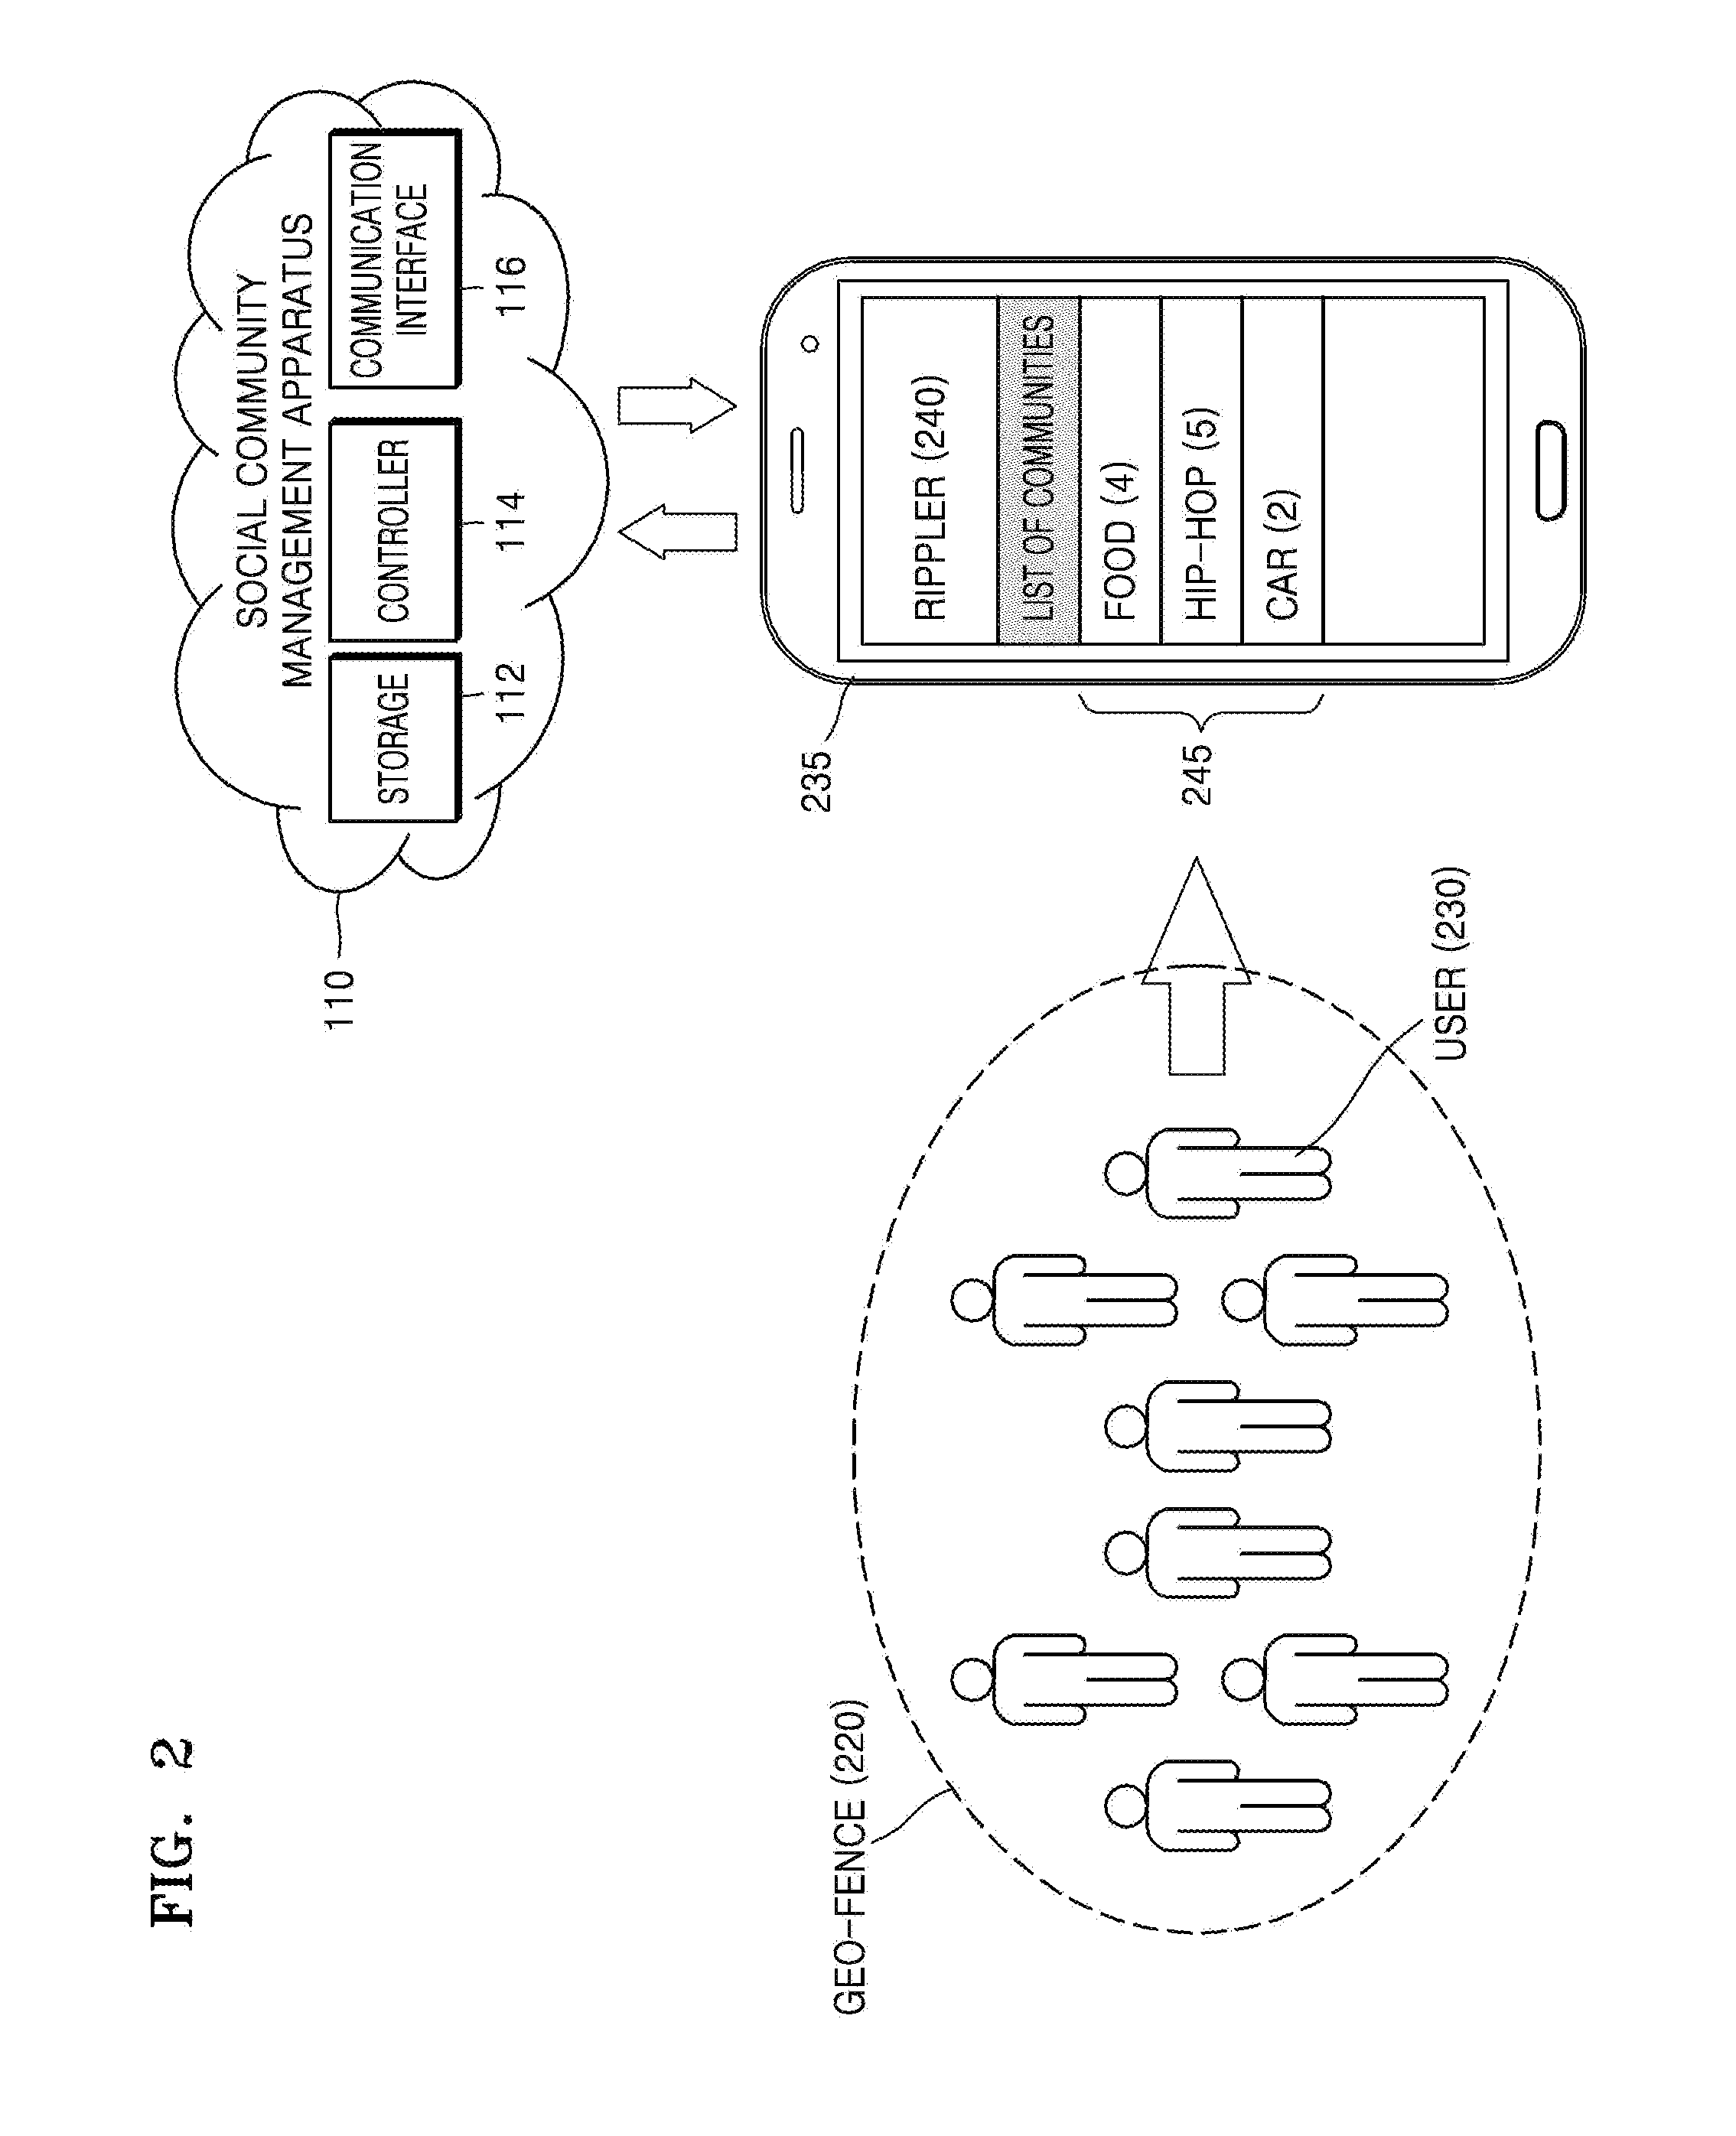 Location-based social community management apparatus and method